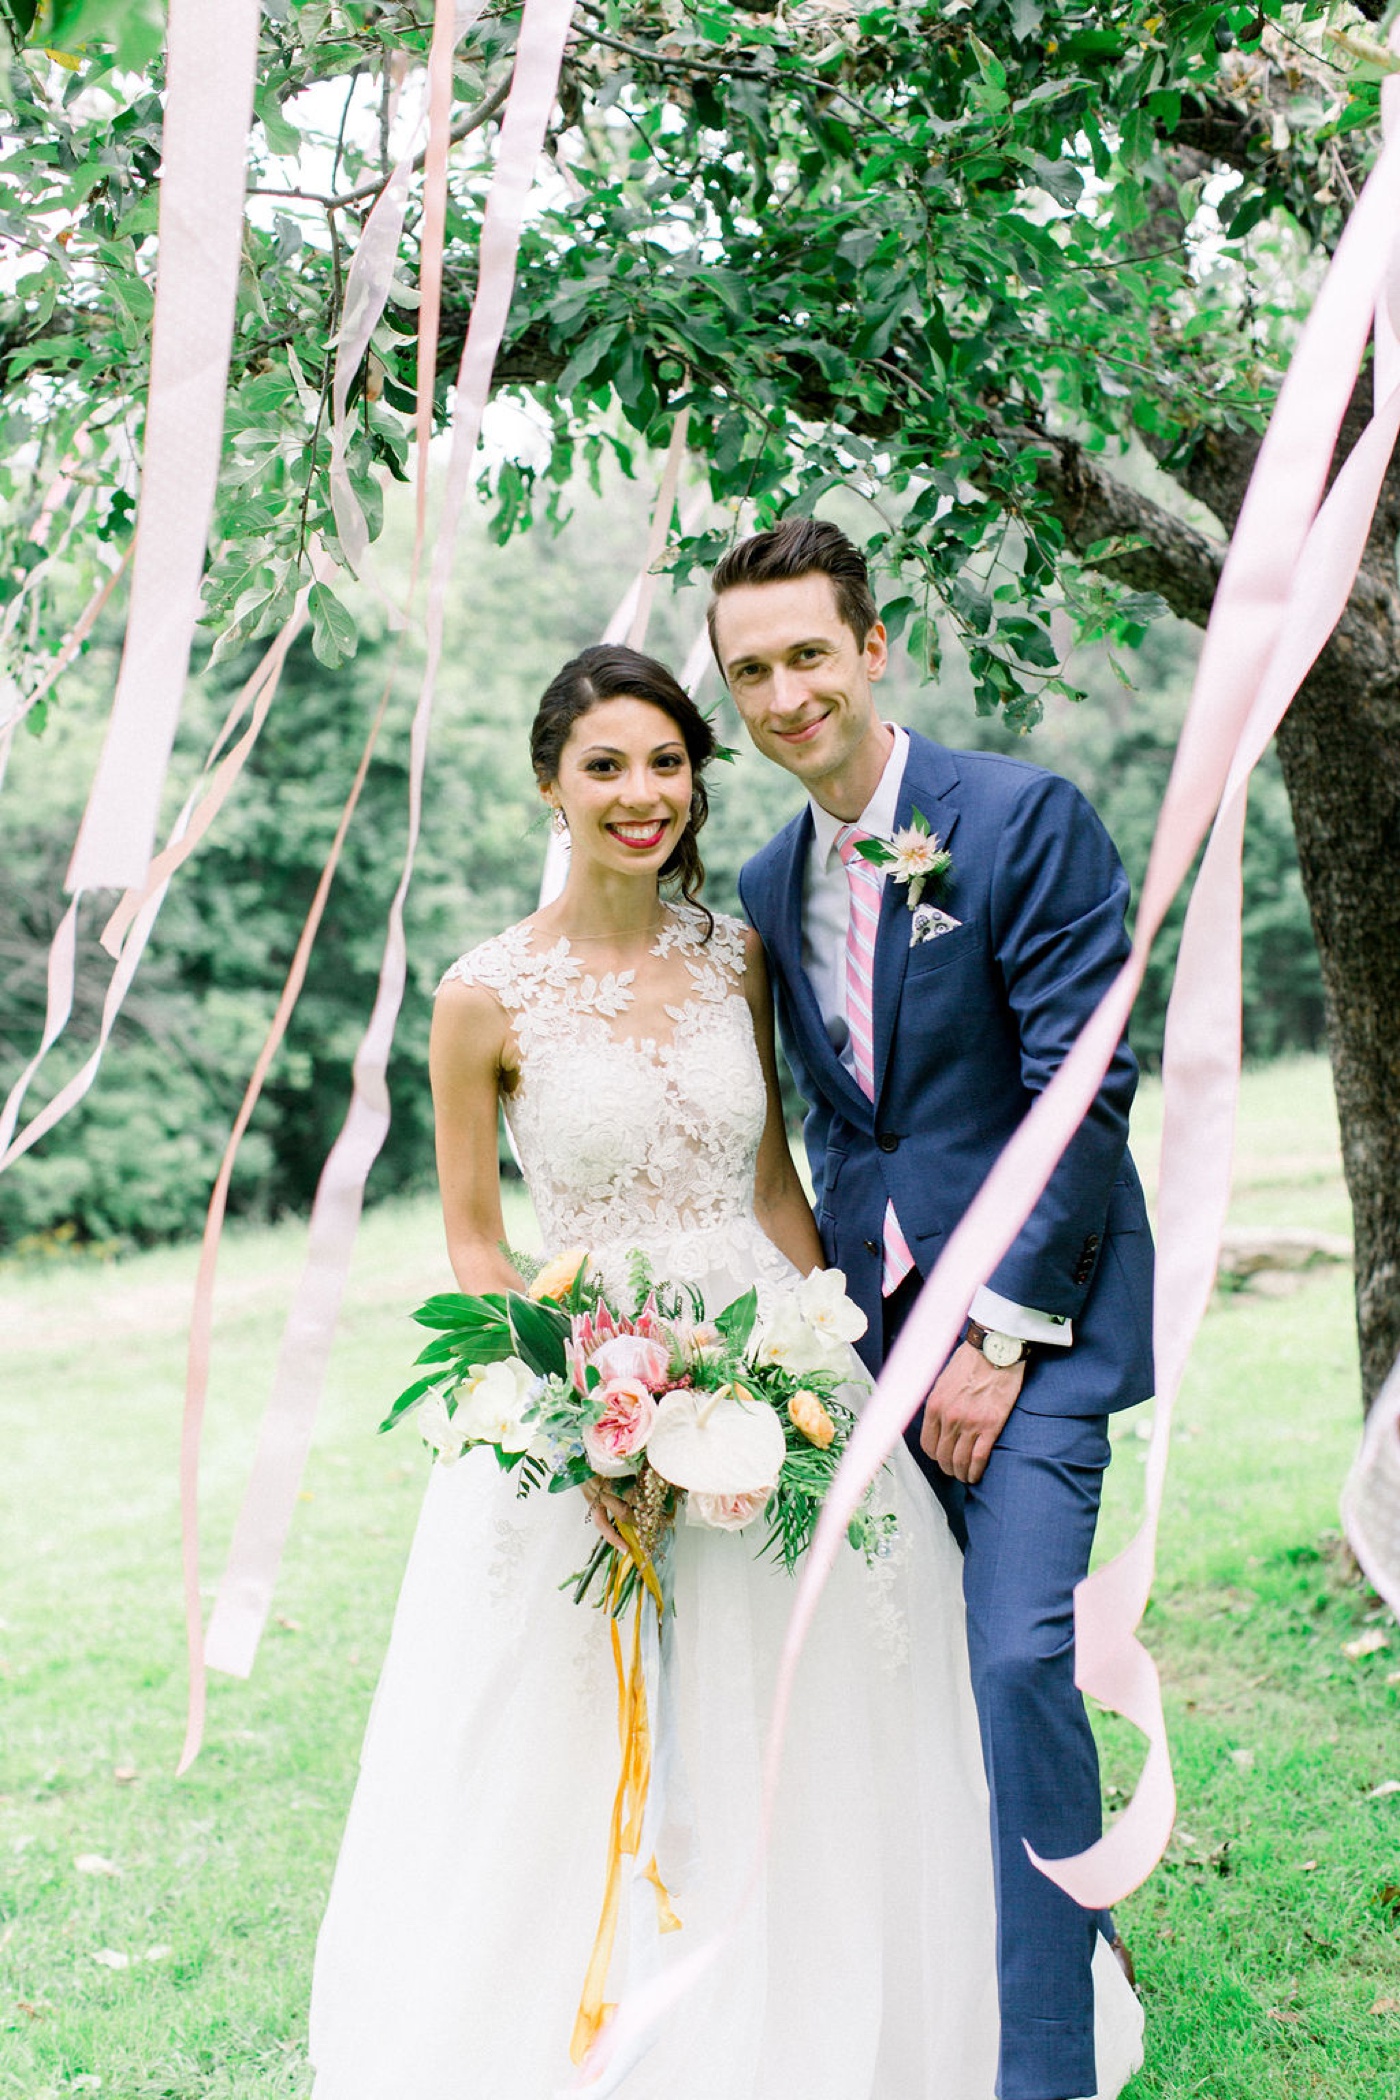 Bridal portraits from a backyard wedding in New Hampshire